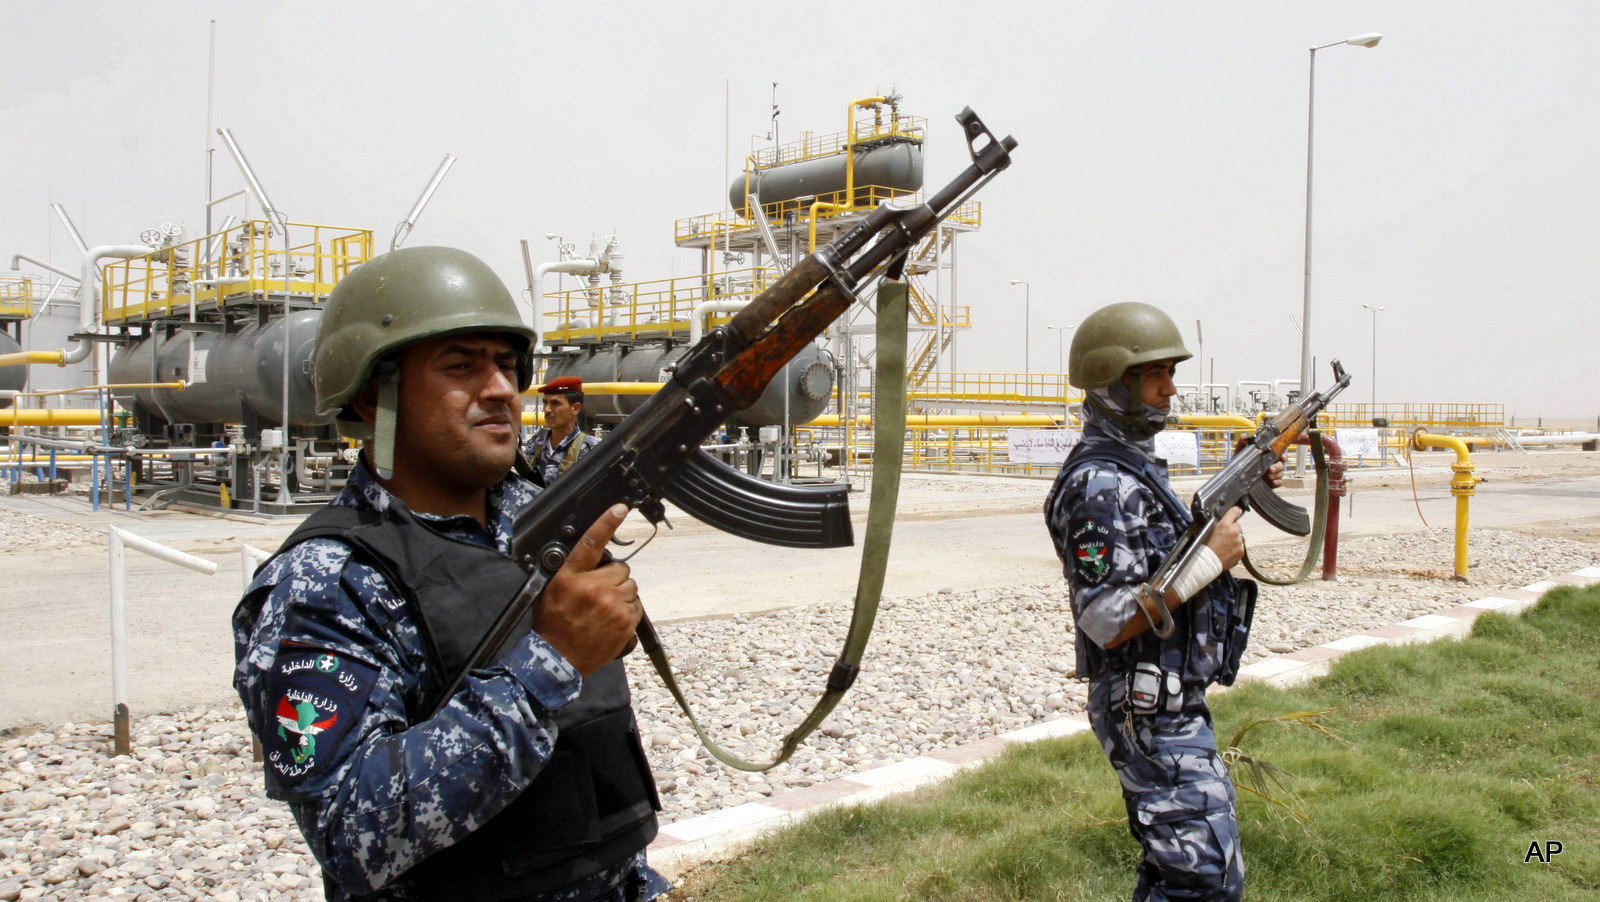 Iraqi policemen stand guard at at a newly inaugurated gas processing facility at Tuba oil field in the southern oil-rich province of Basra, 550 kilometers (340 miles) southeast of Baghdad, Iraq, Saturday, June 4, 2011. 